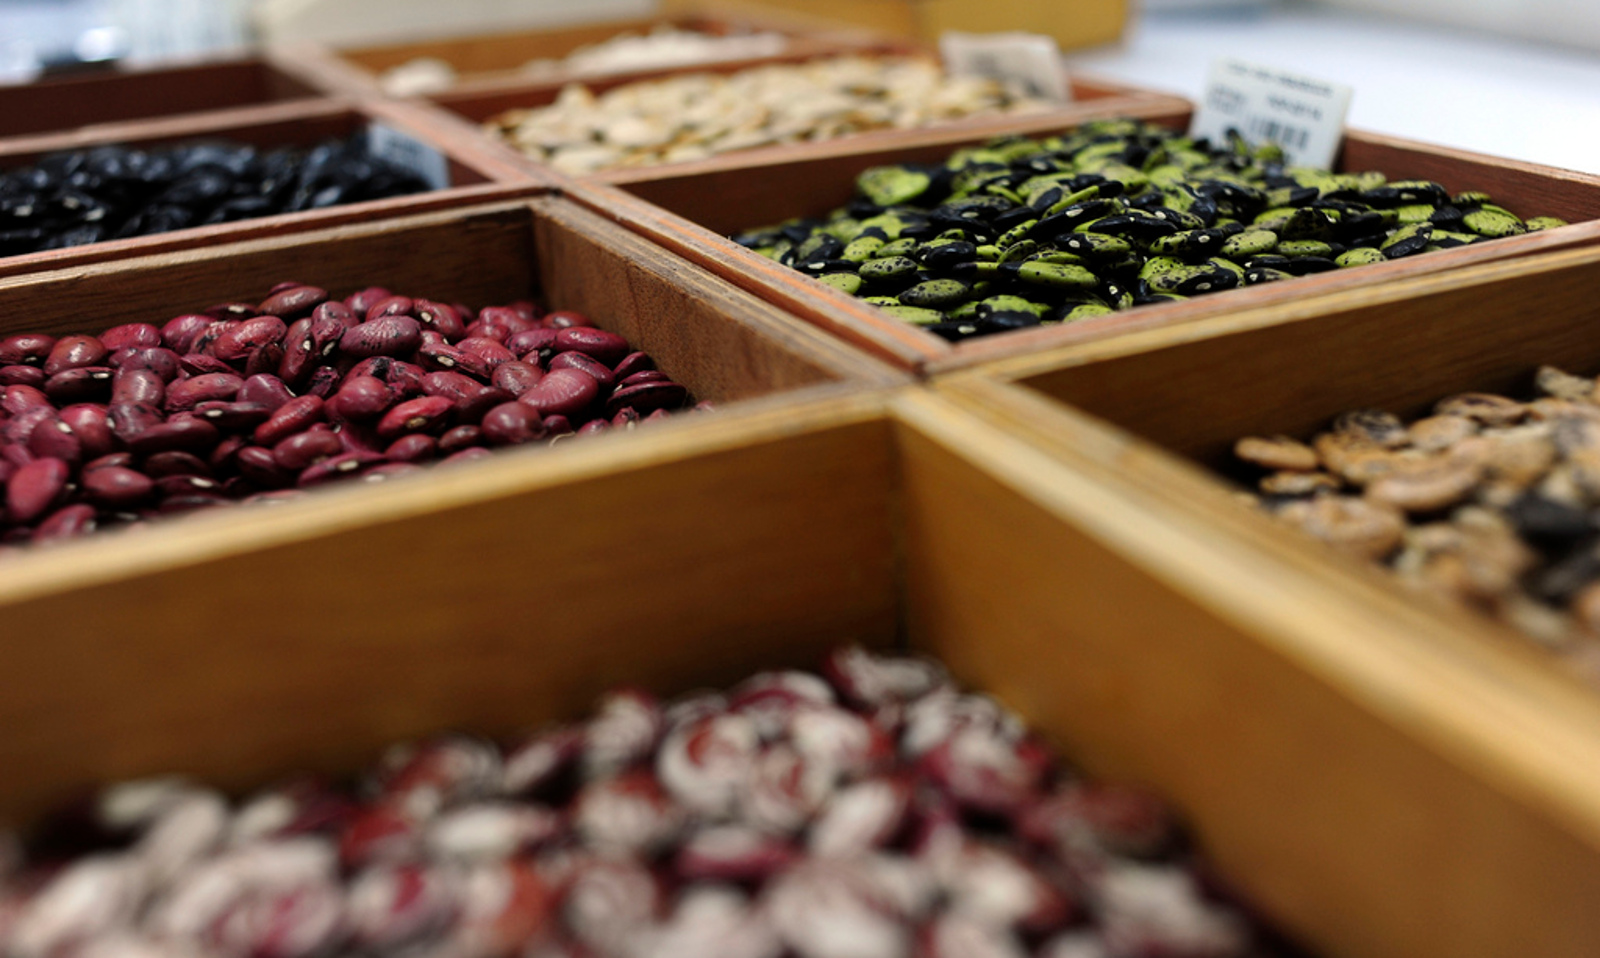 How to Start Your Own Seed Bank